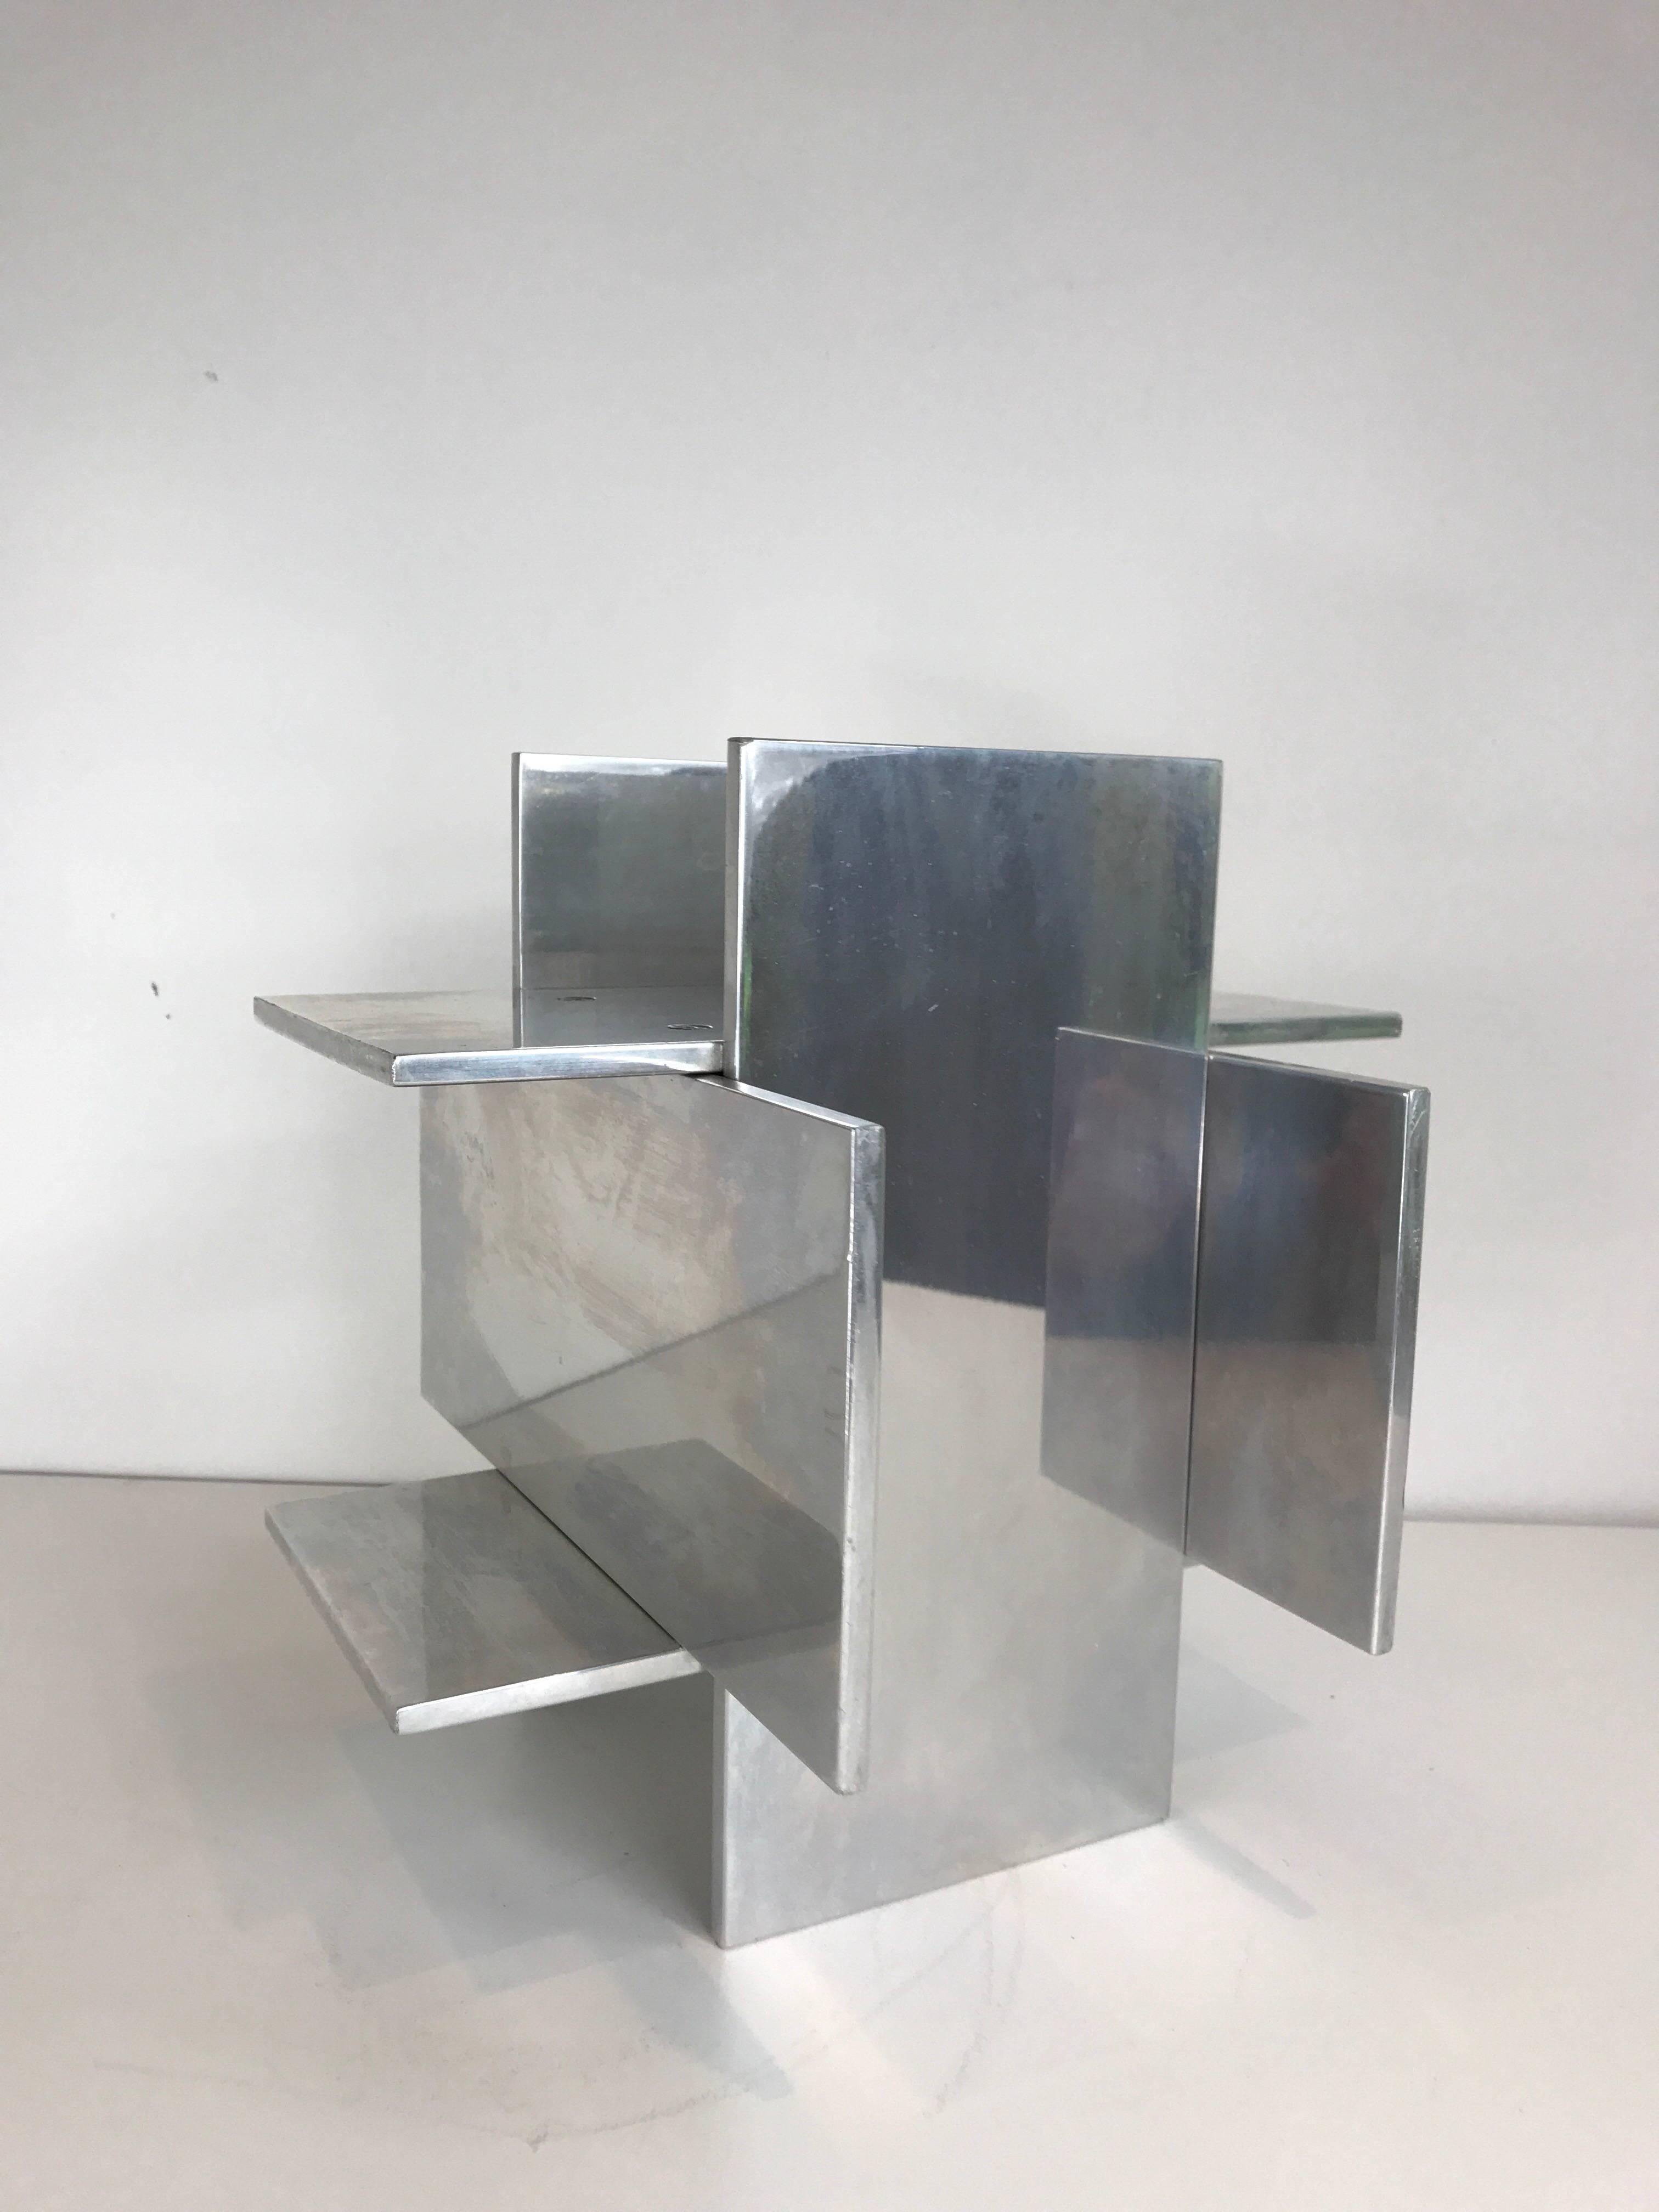 A midcentury chromed steel tabletop sculpture with geometric form and riveted plates.